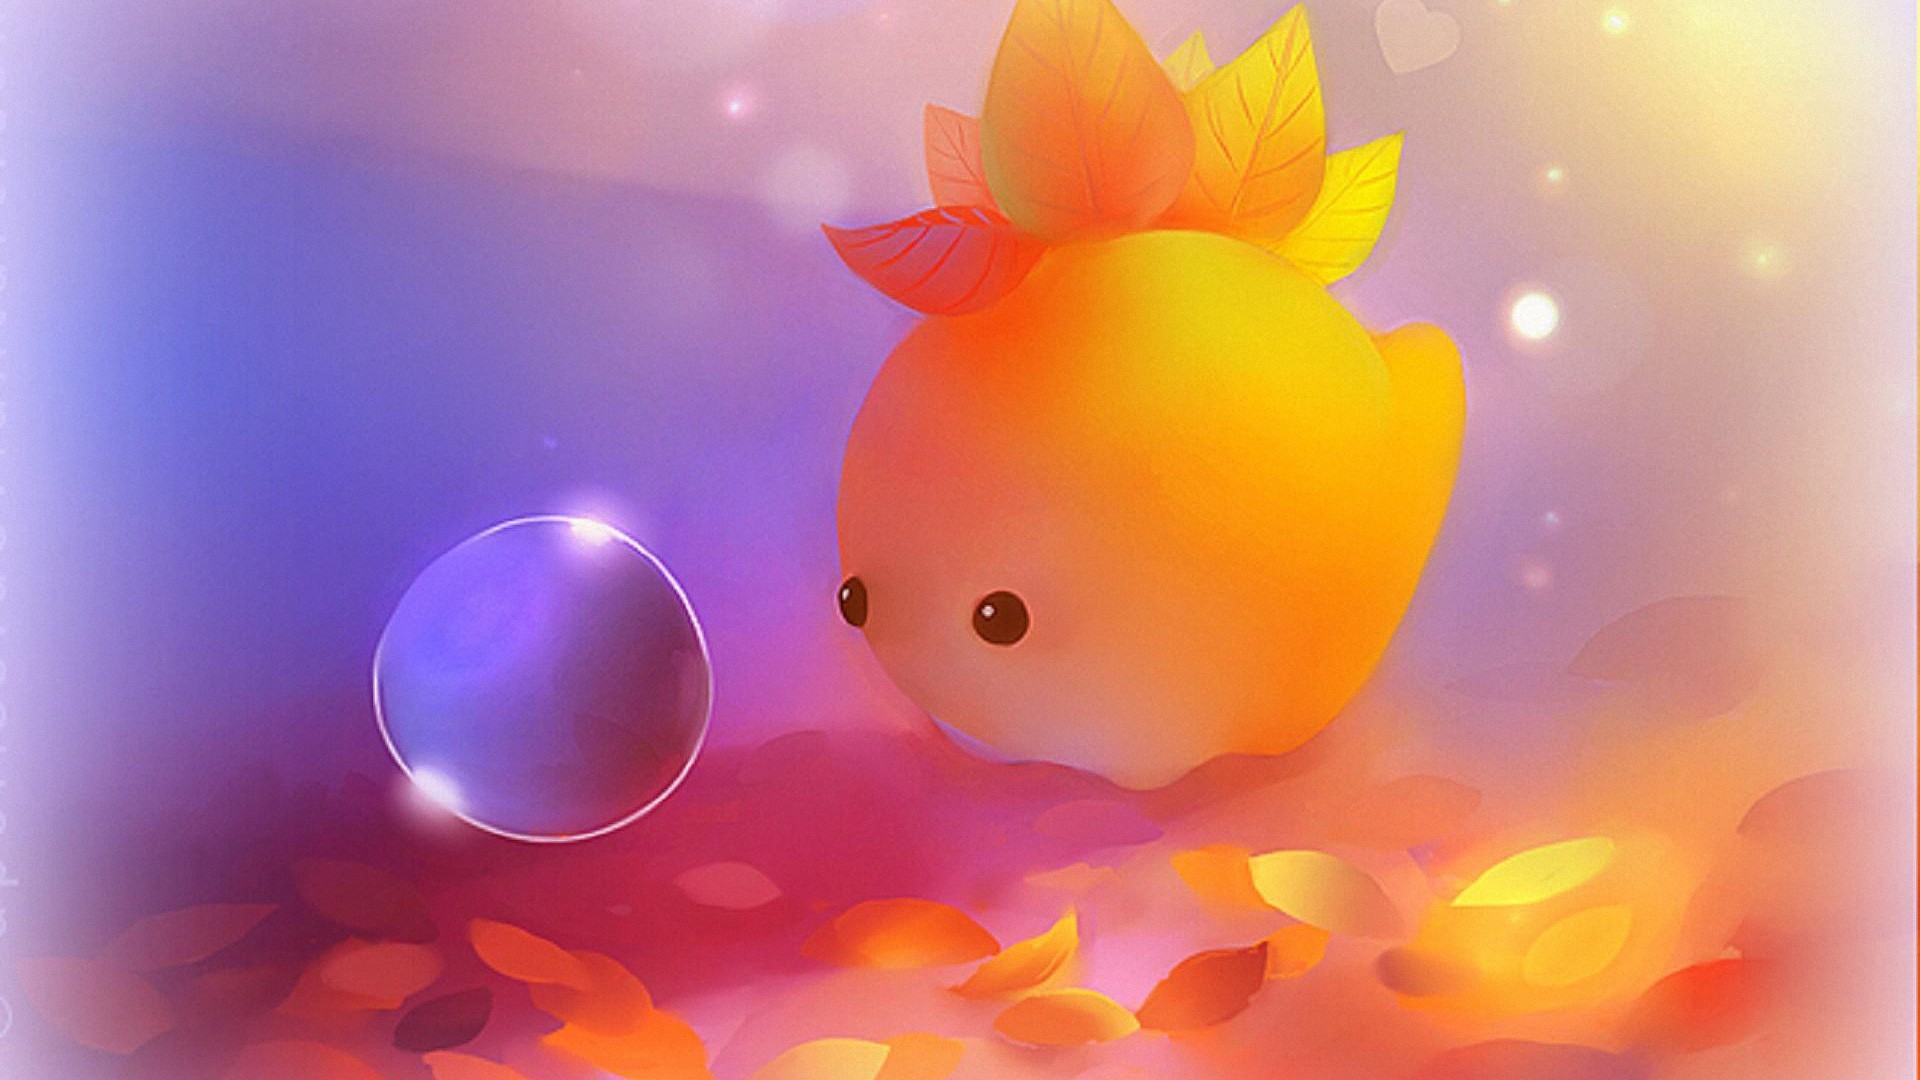 Cute Fall Desktop Wallpaper HD with high-resolution 1920x1080 pixel. You can use and set as wallpaper for Notebook Screensavers, Mac Wallpapers, Mobile Home Screen, iPhone or Android Phones Lock Screen